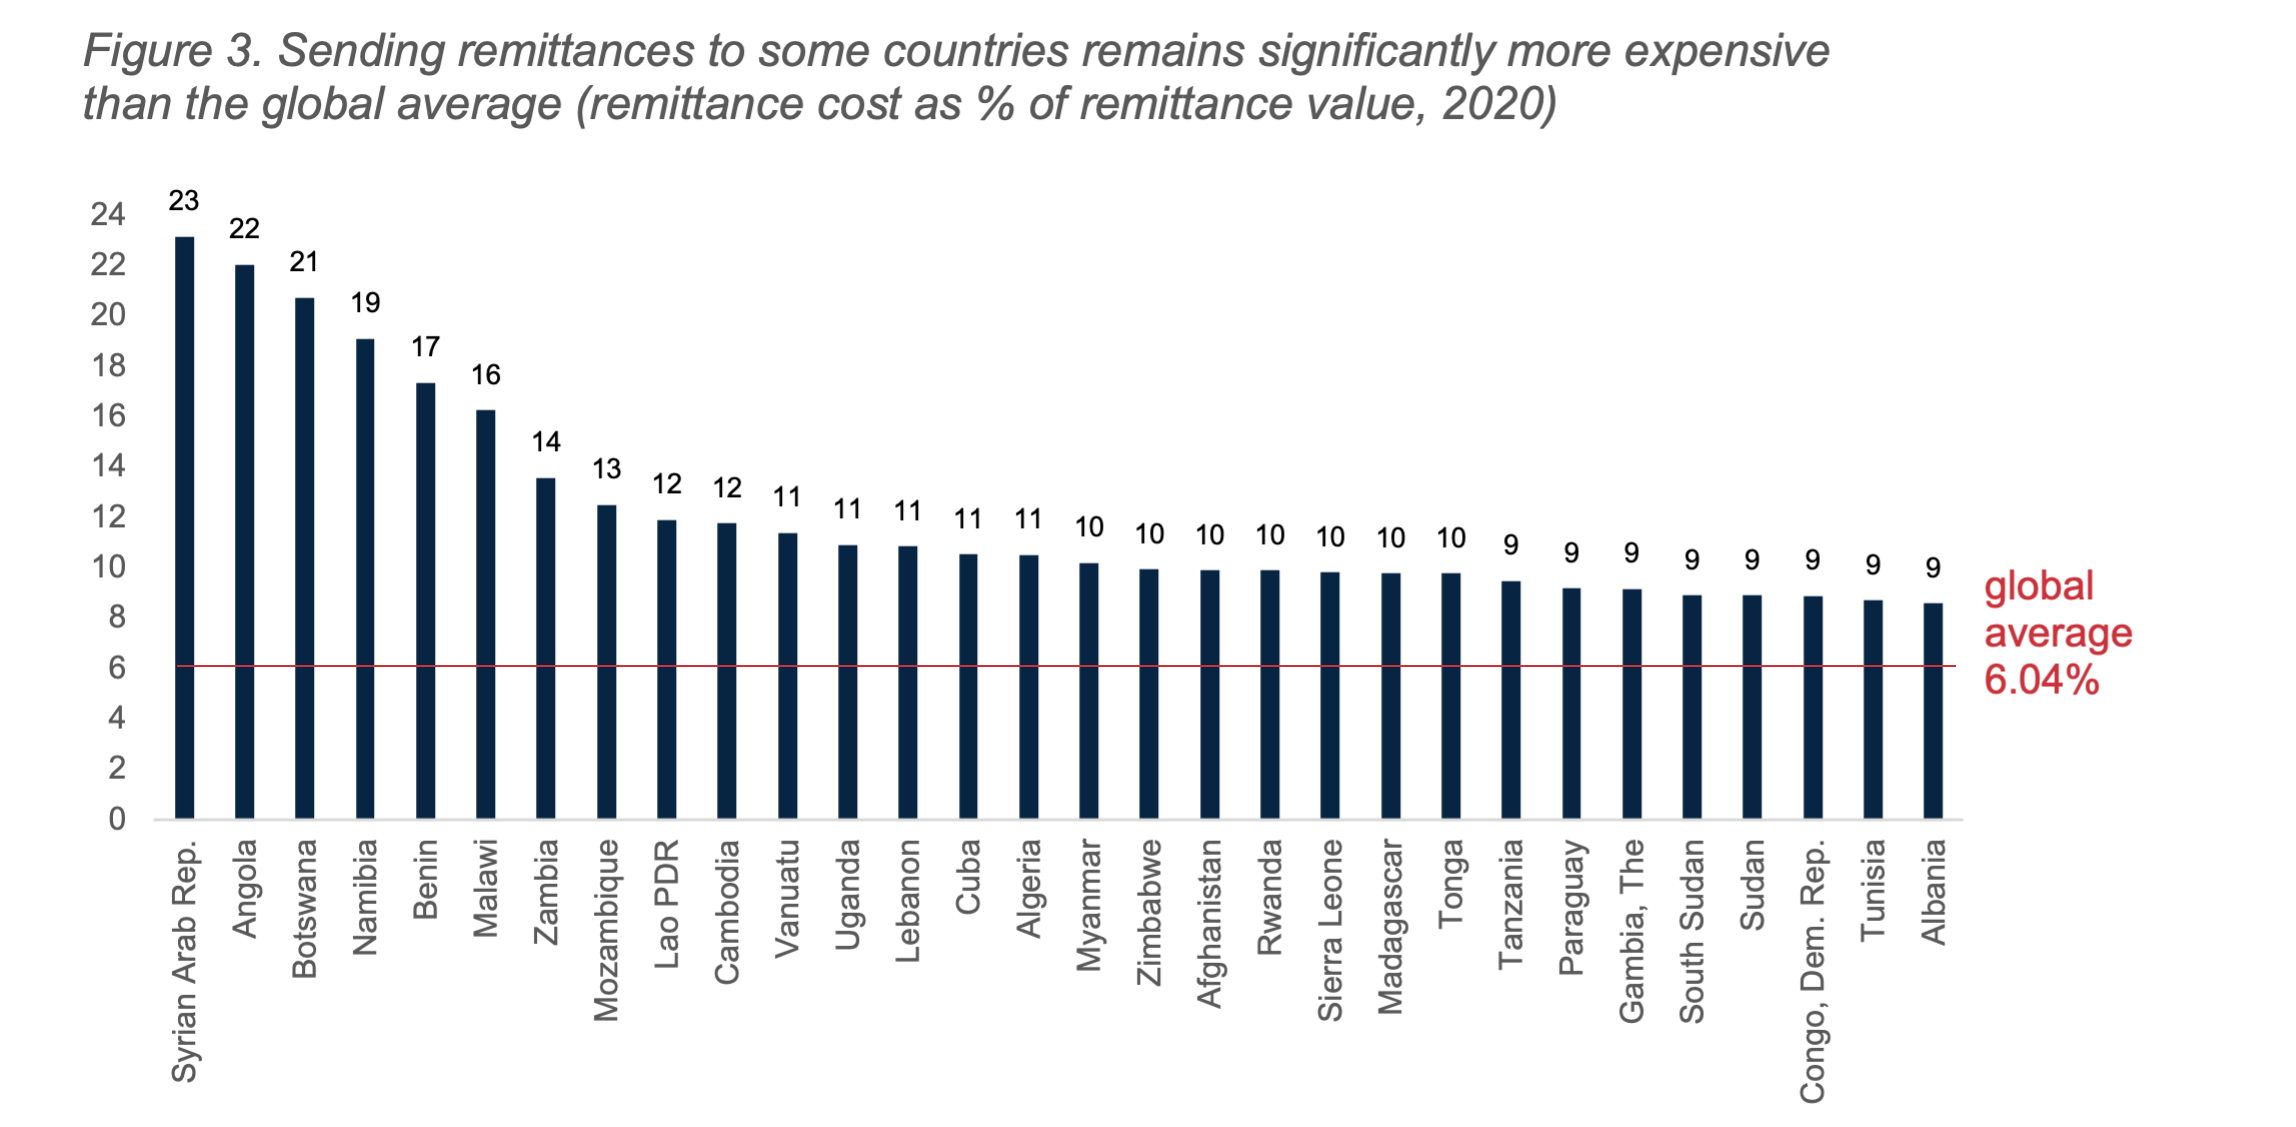 Sending remittances to some countries remains significantly more expensive than the global average (remittance cost as % of remittance value, 2020)